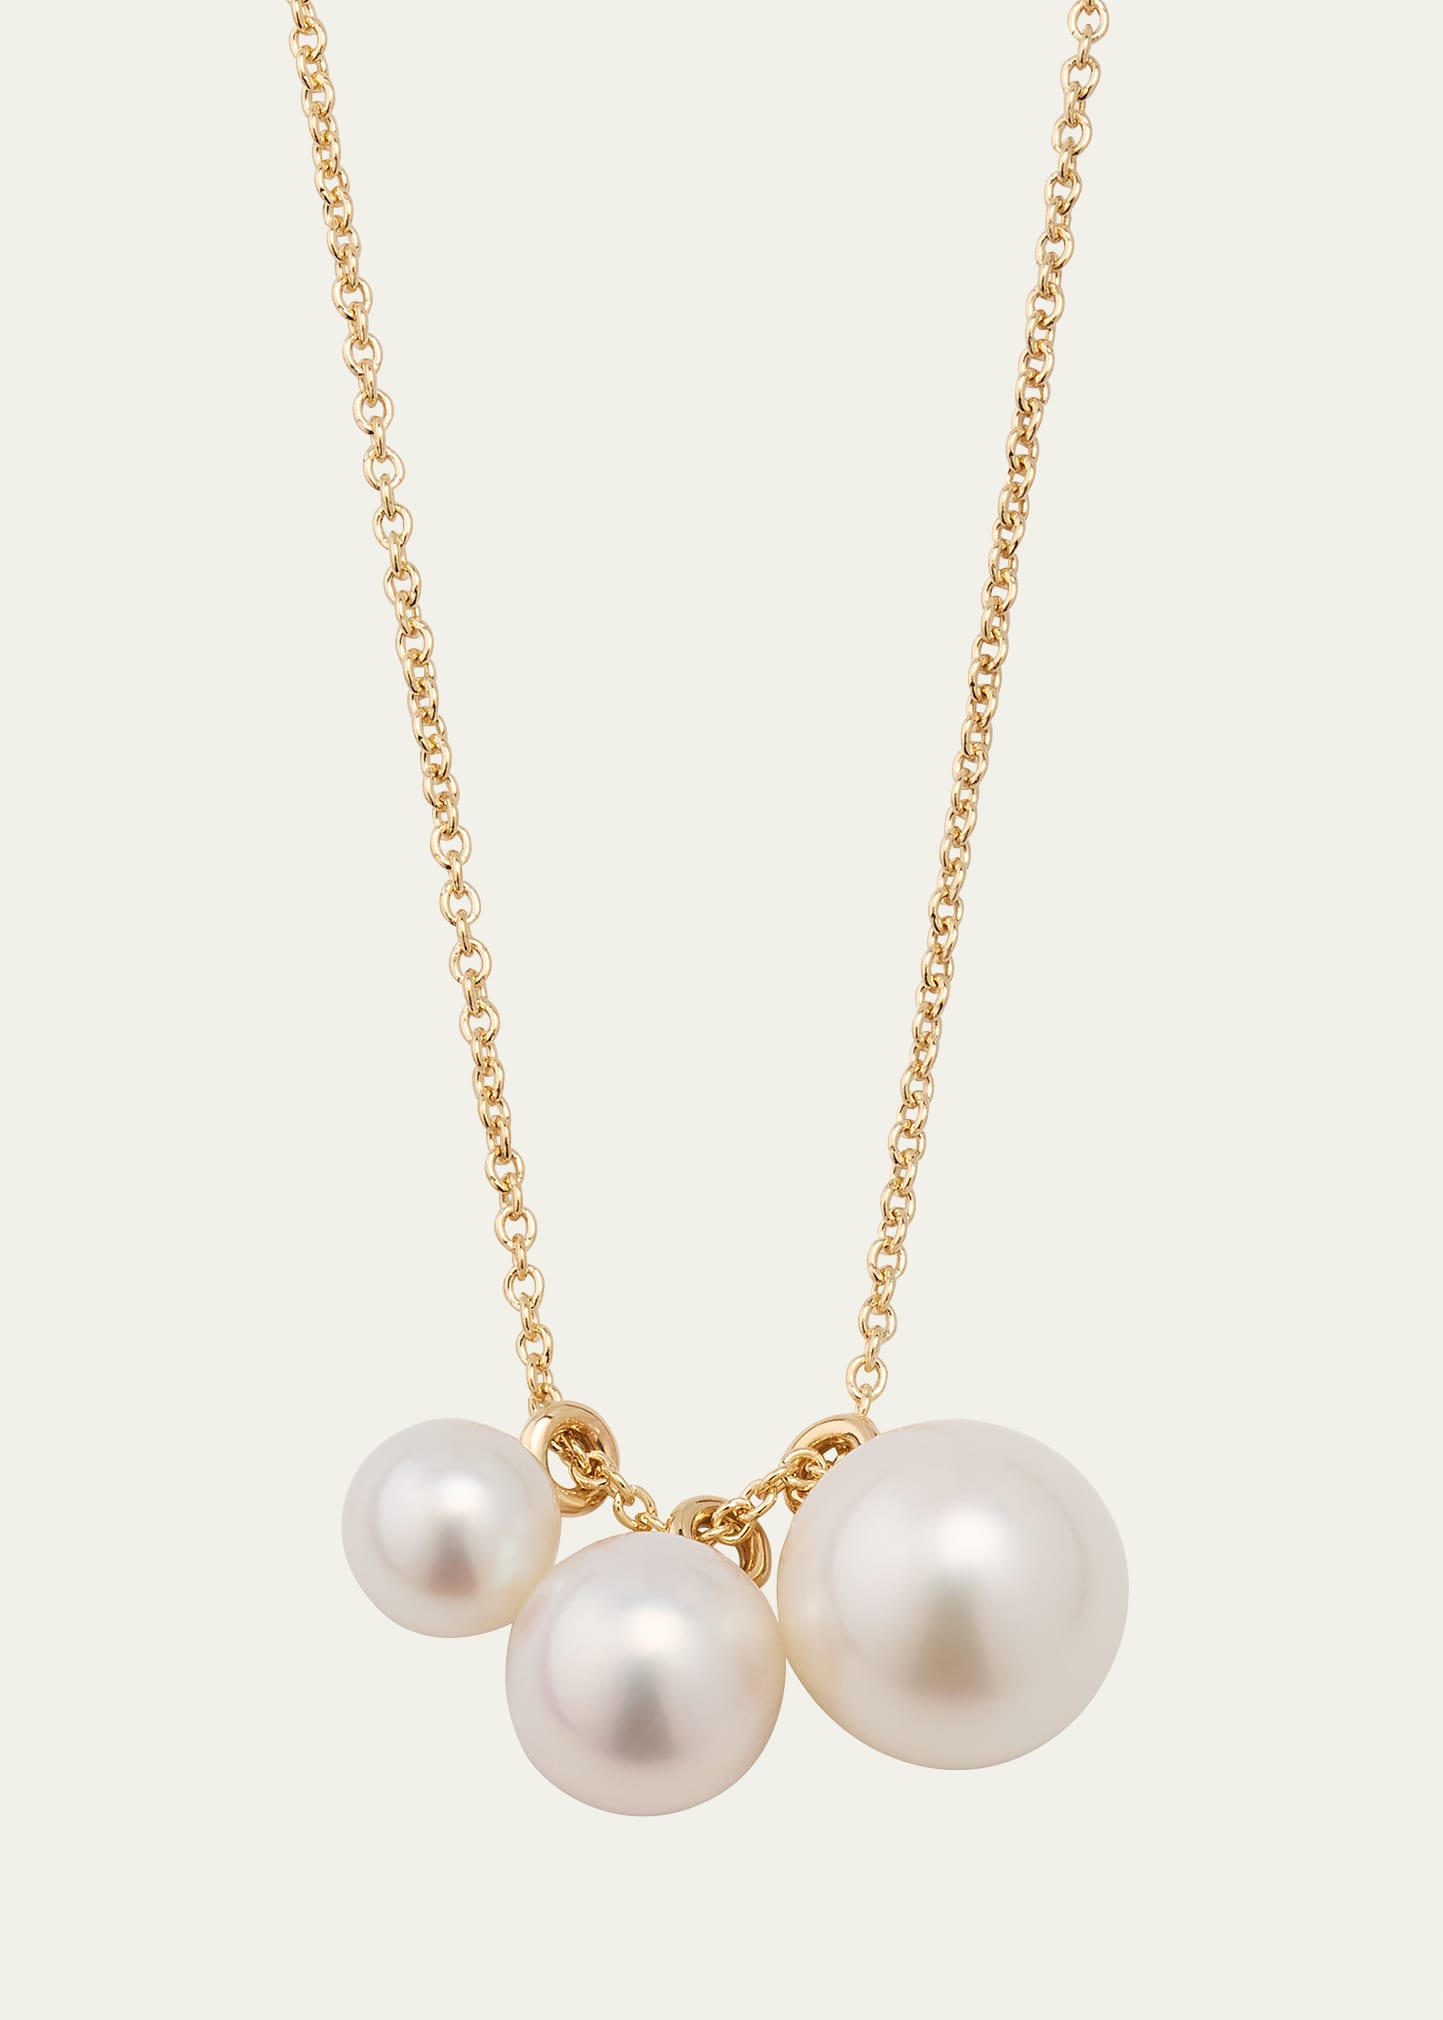 Sophie Bille Brahe 14k Recycled Yellow Gold Stella Necklace With Freshwater Pearls In Yg